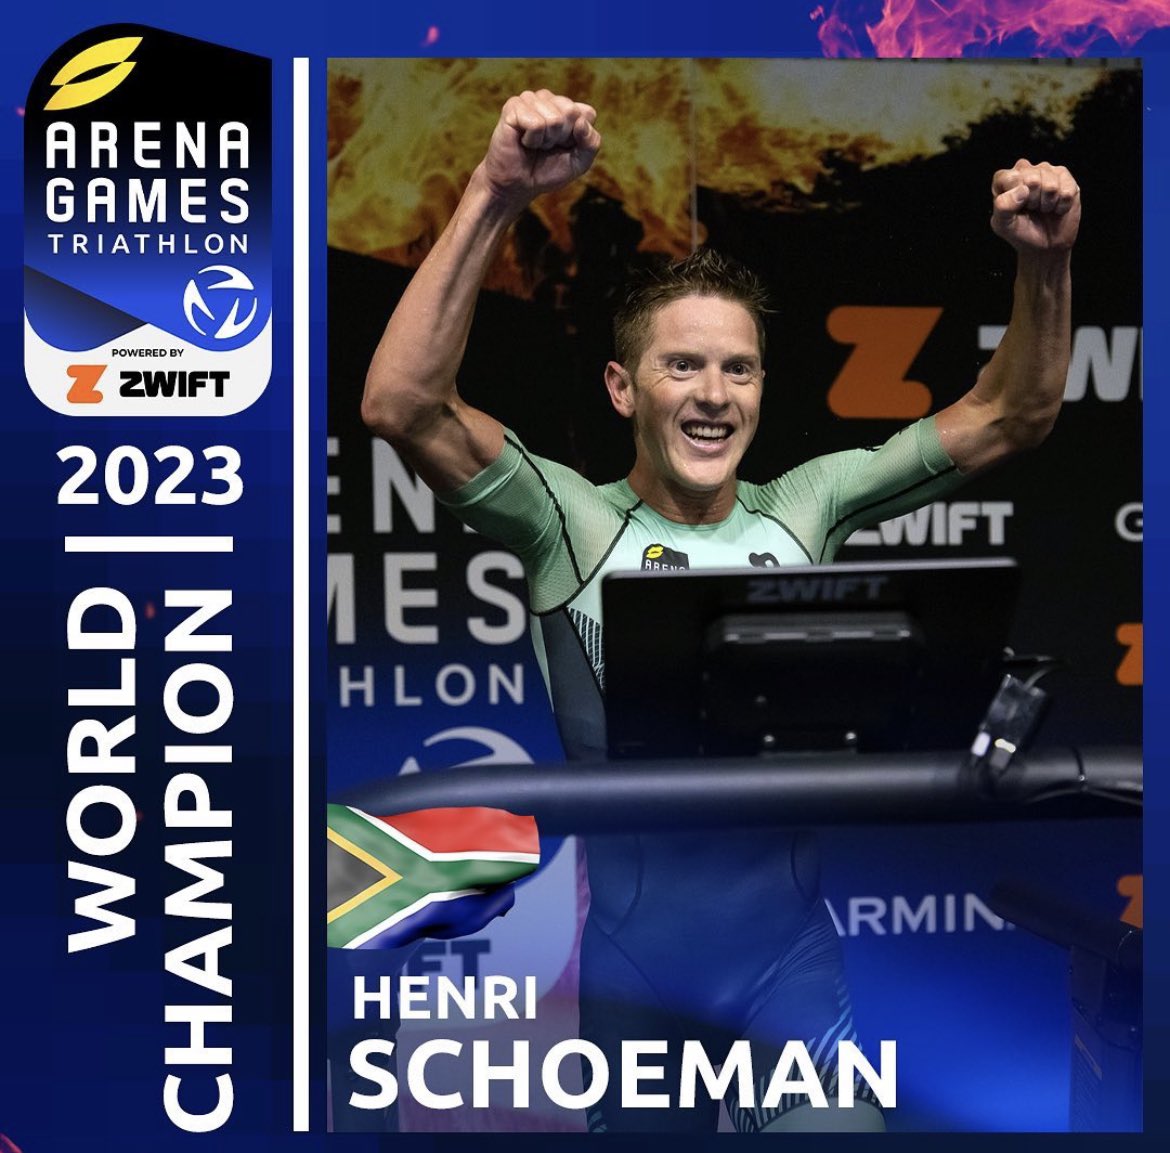 Our 2023 Arena Games Triathlon Series powered by @GoZwift World Champions are Sophie Linn 🇦🇺 and Henri Schoeman 🇿🇦after a blockbuster weekend of racing at the London Aquatics Centre!